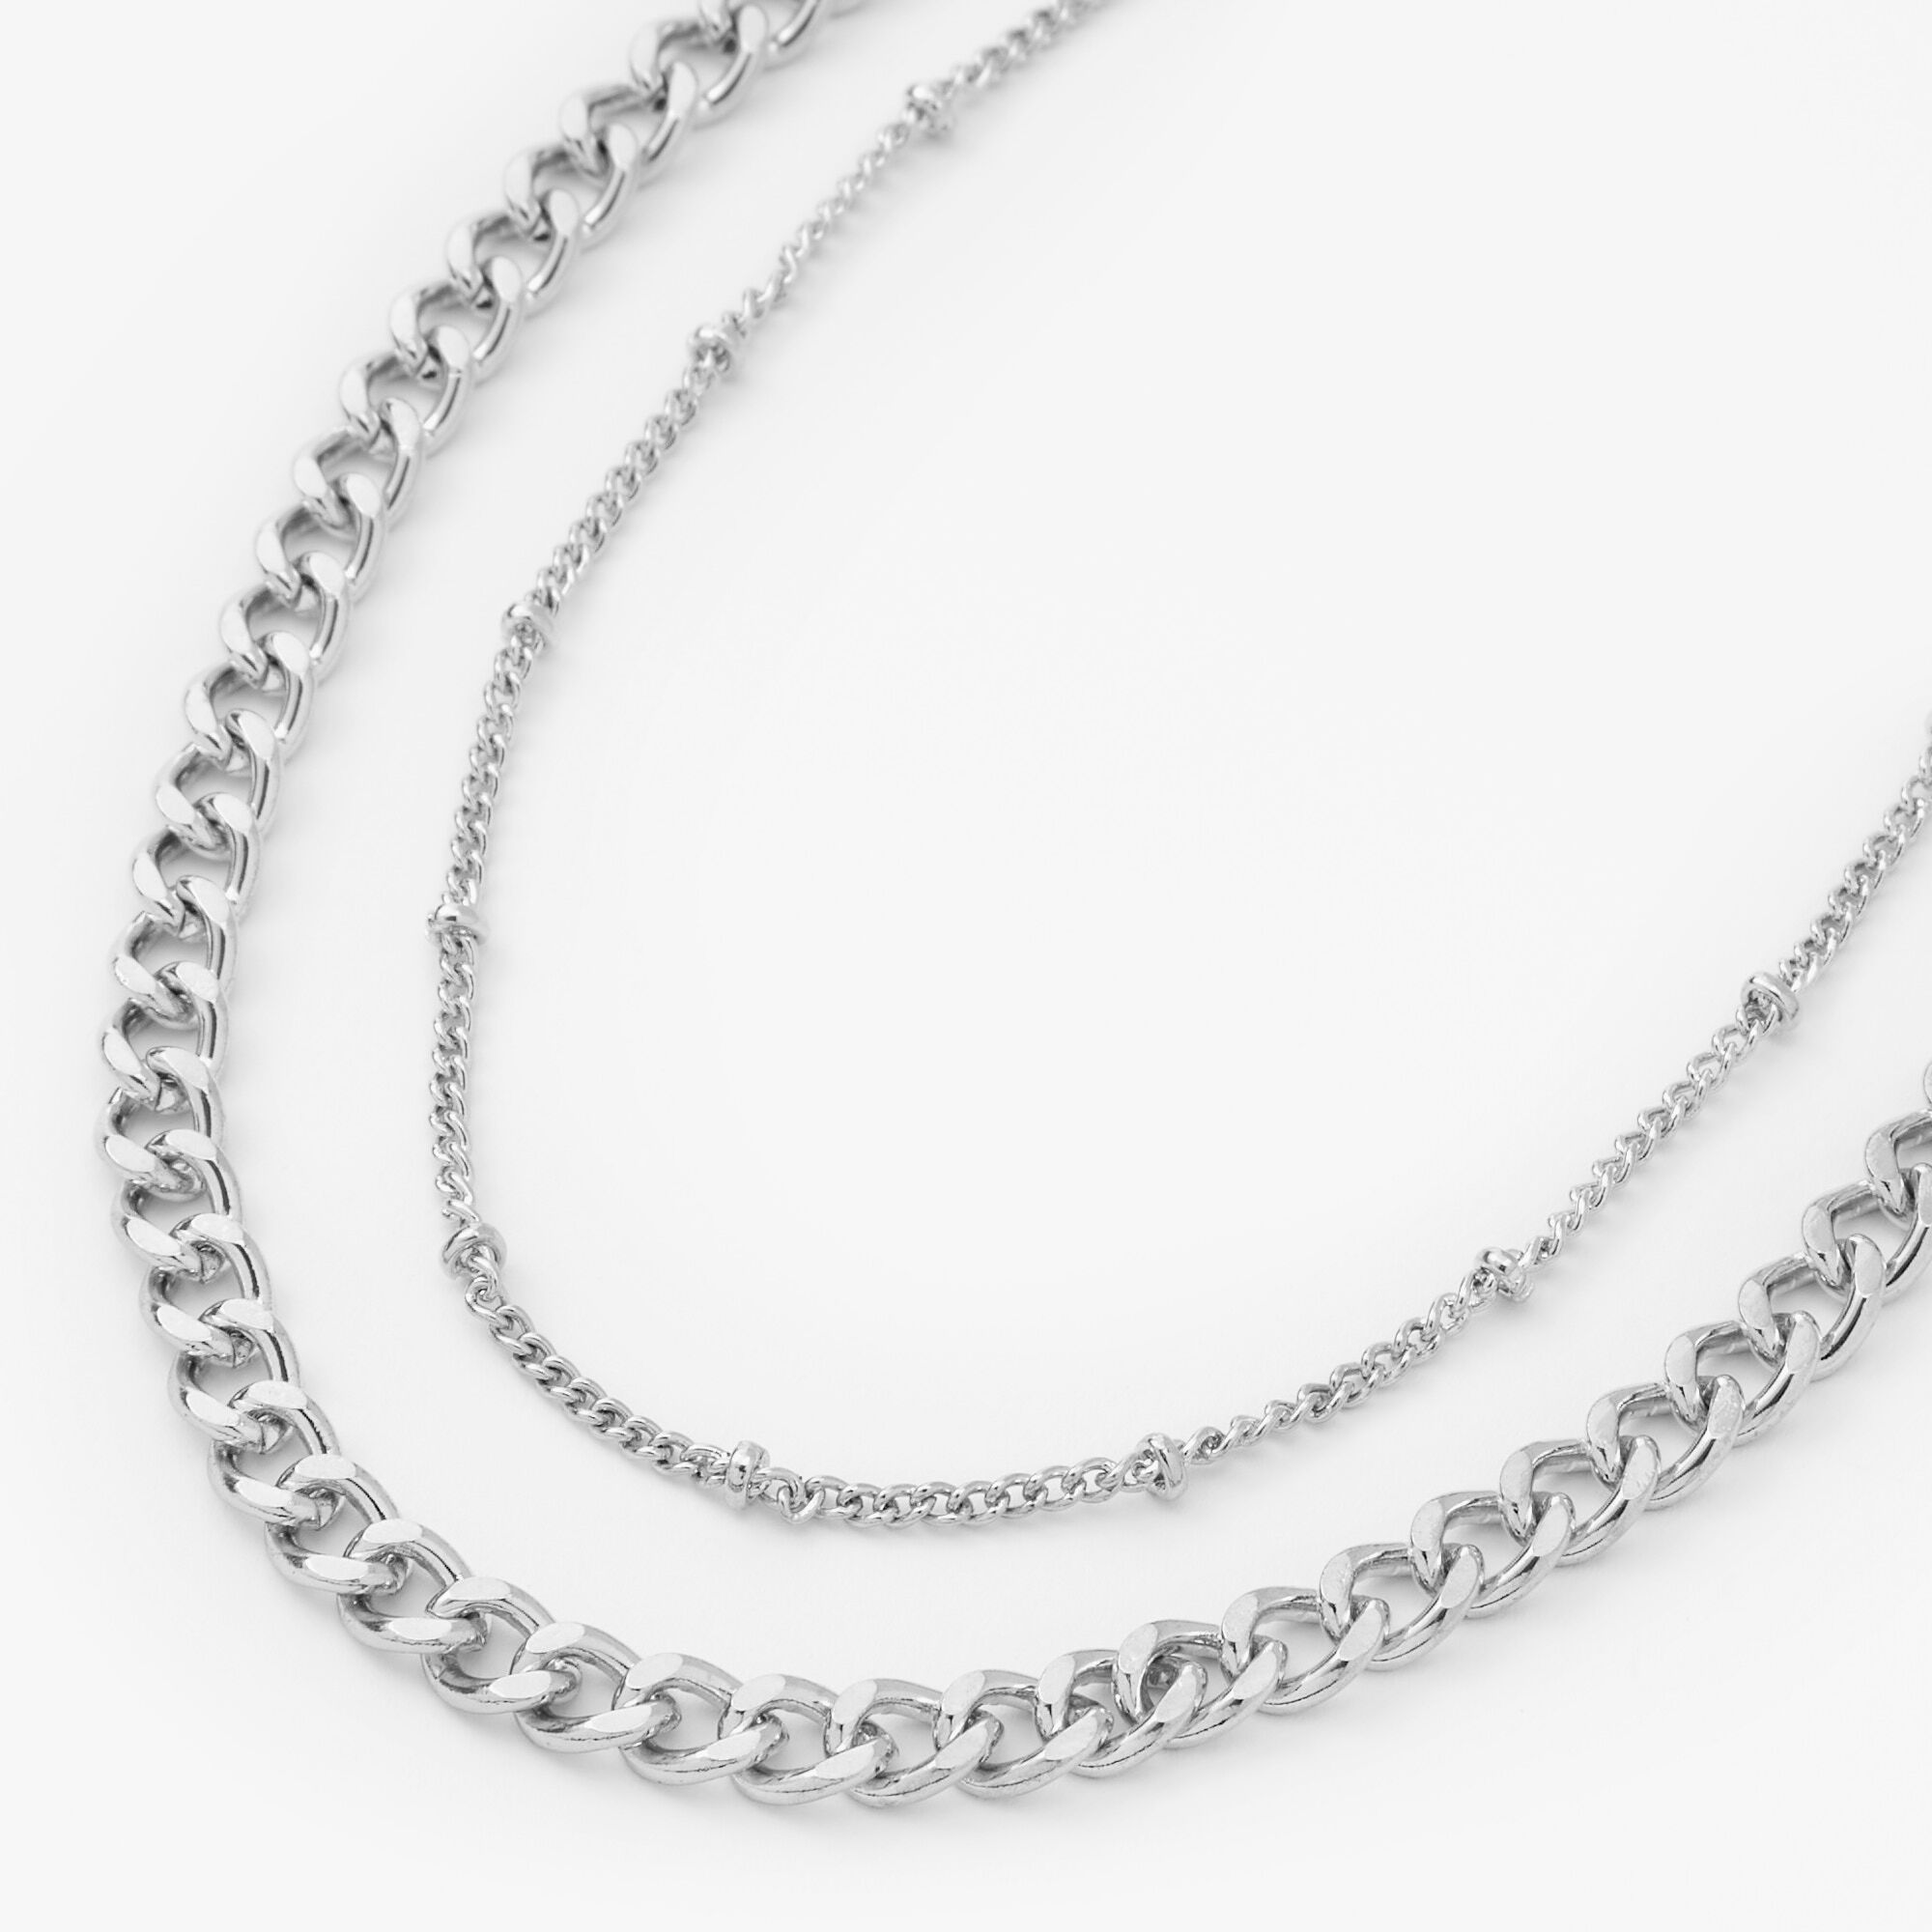 View Claires Tone Chunky Multi Strand Necklace Silver information